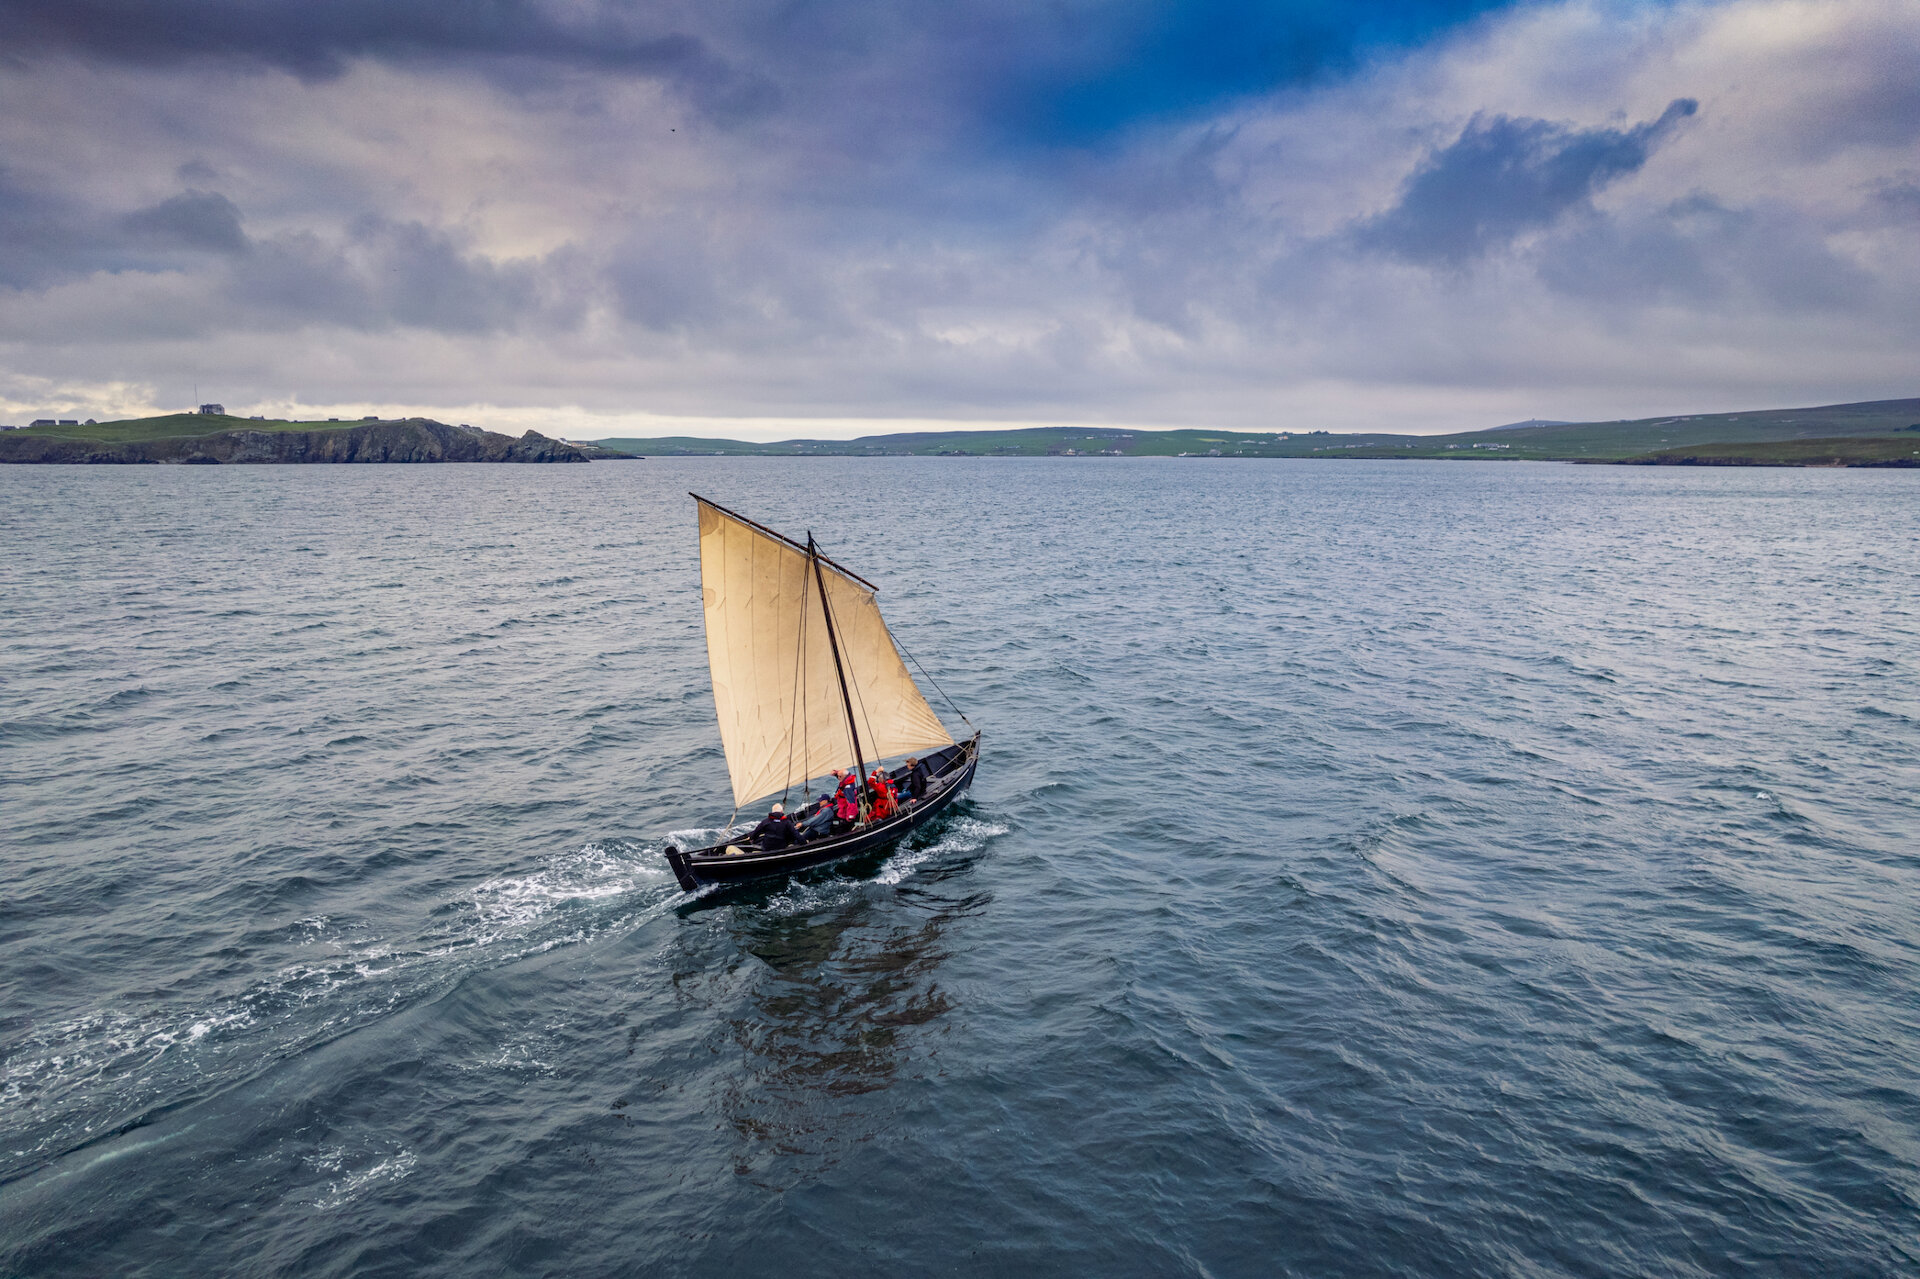 The Vaila Mae on the water in Breiwick, Lerwick in June 2022. Photo: Euan Myles.